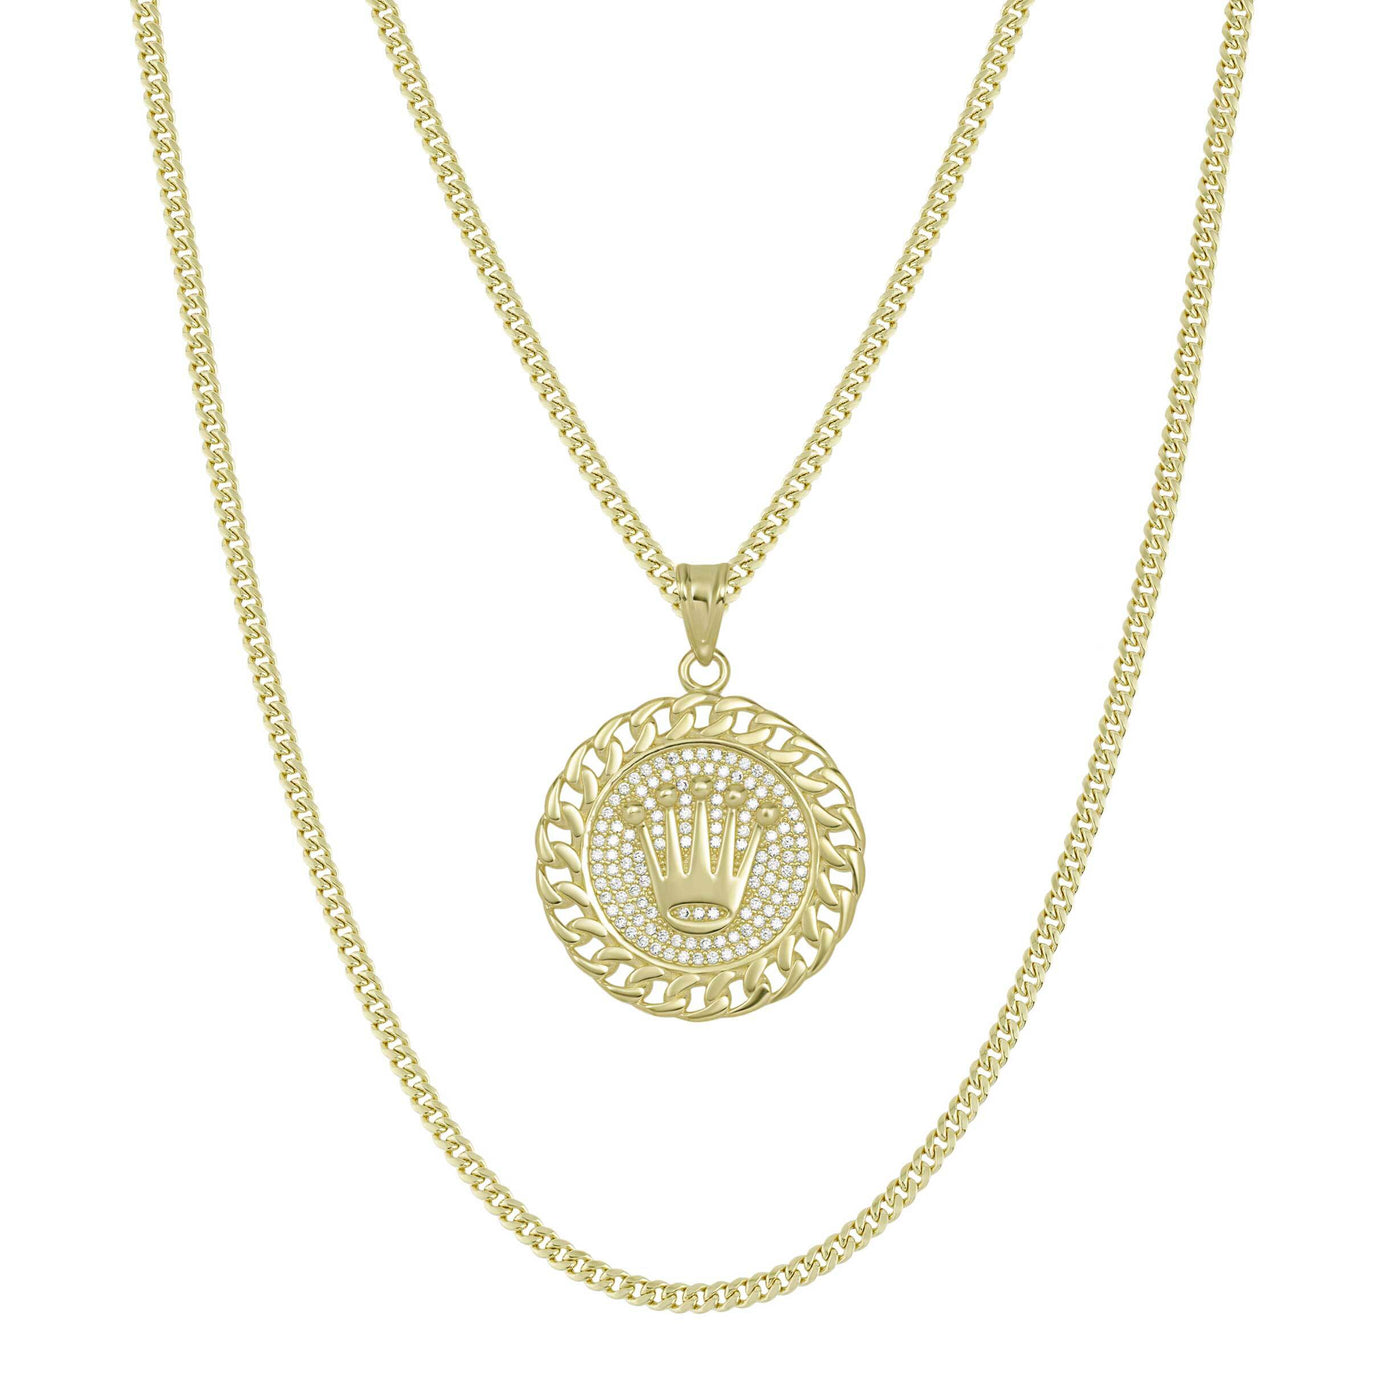 1 1/2" Curb Bordered CZ Crown Medallion Pendant & Chain Necklace Set 10K Yellow Gold